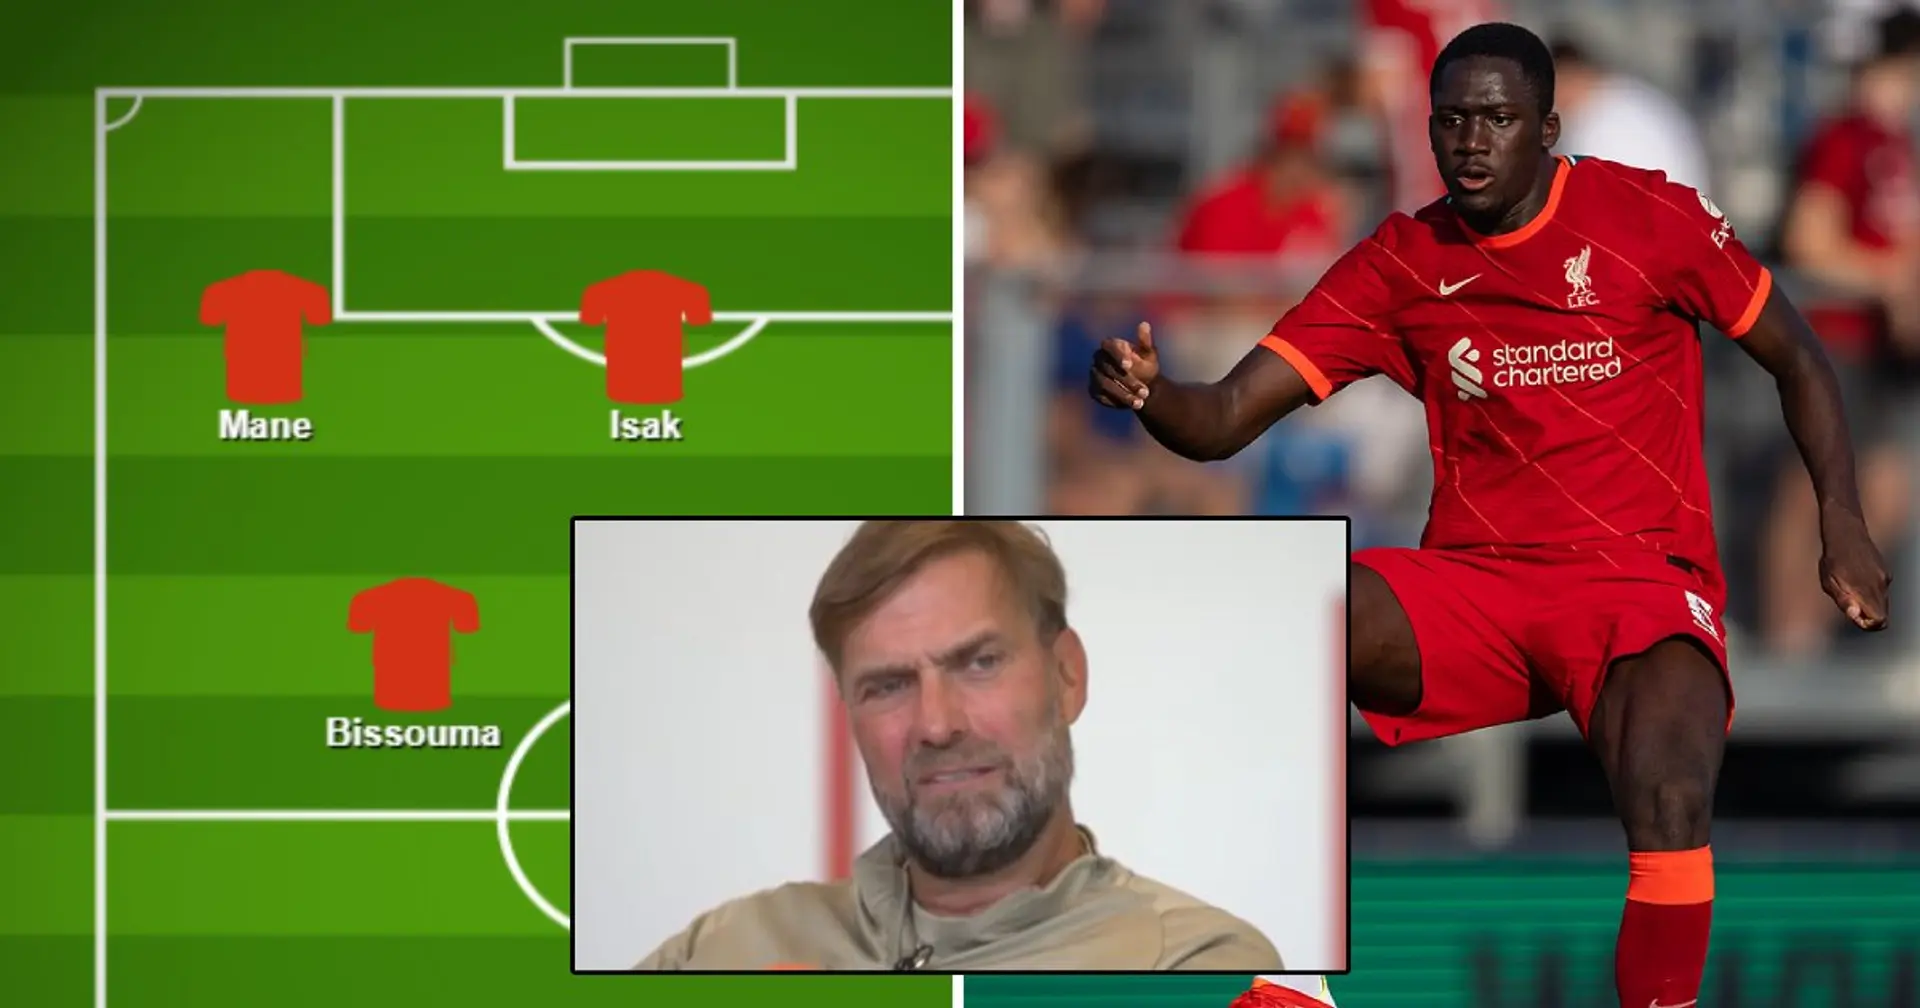 Liverpool's predicted XI before transfer summer window vs Liverpool's actual XI - illustrated & compared 